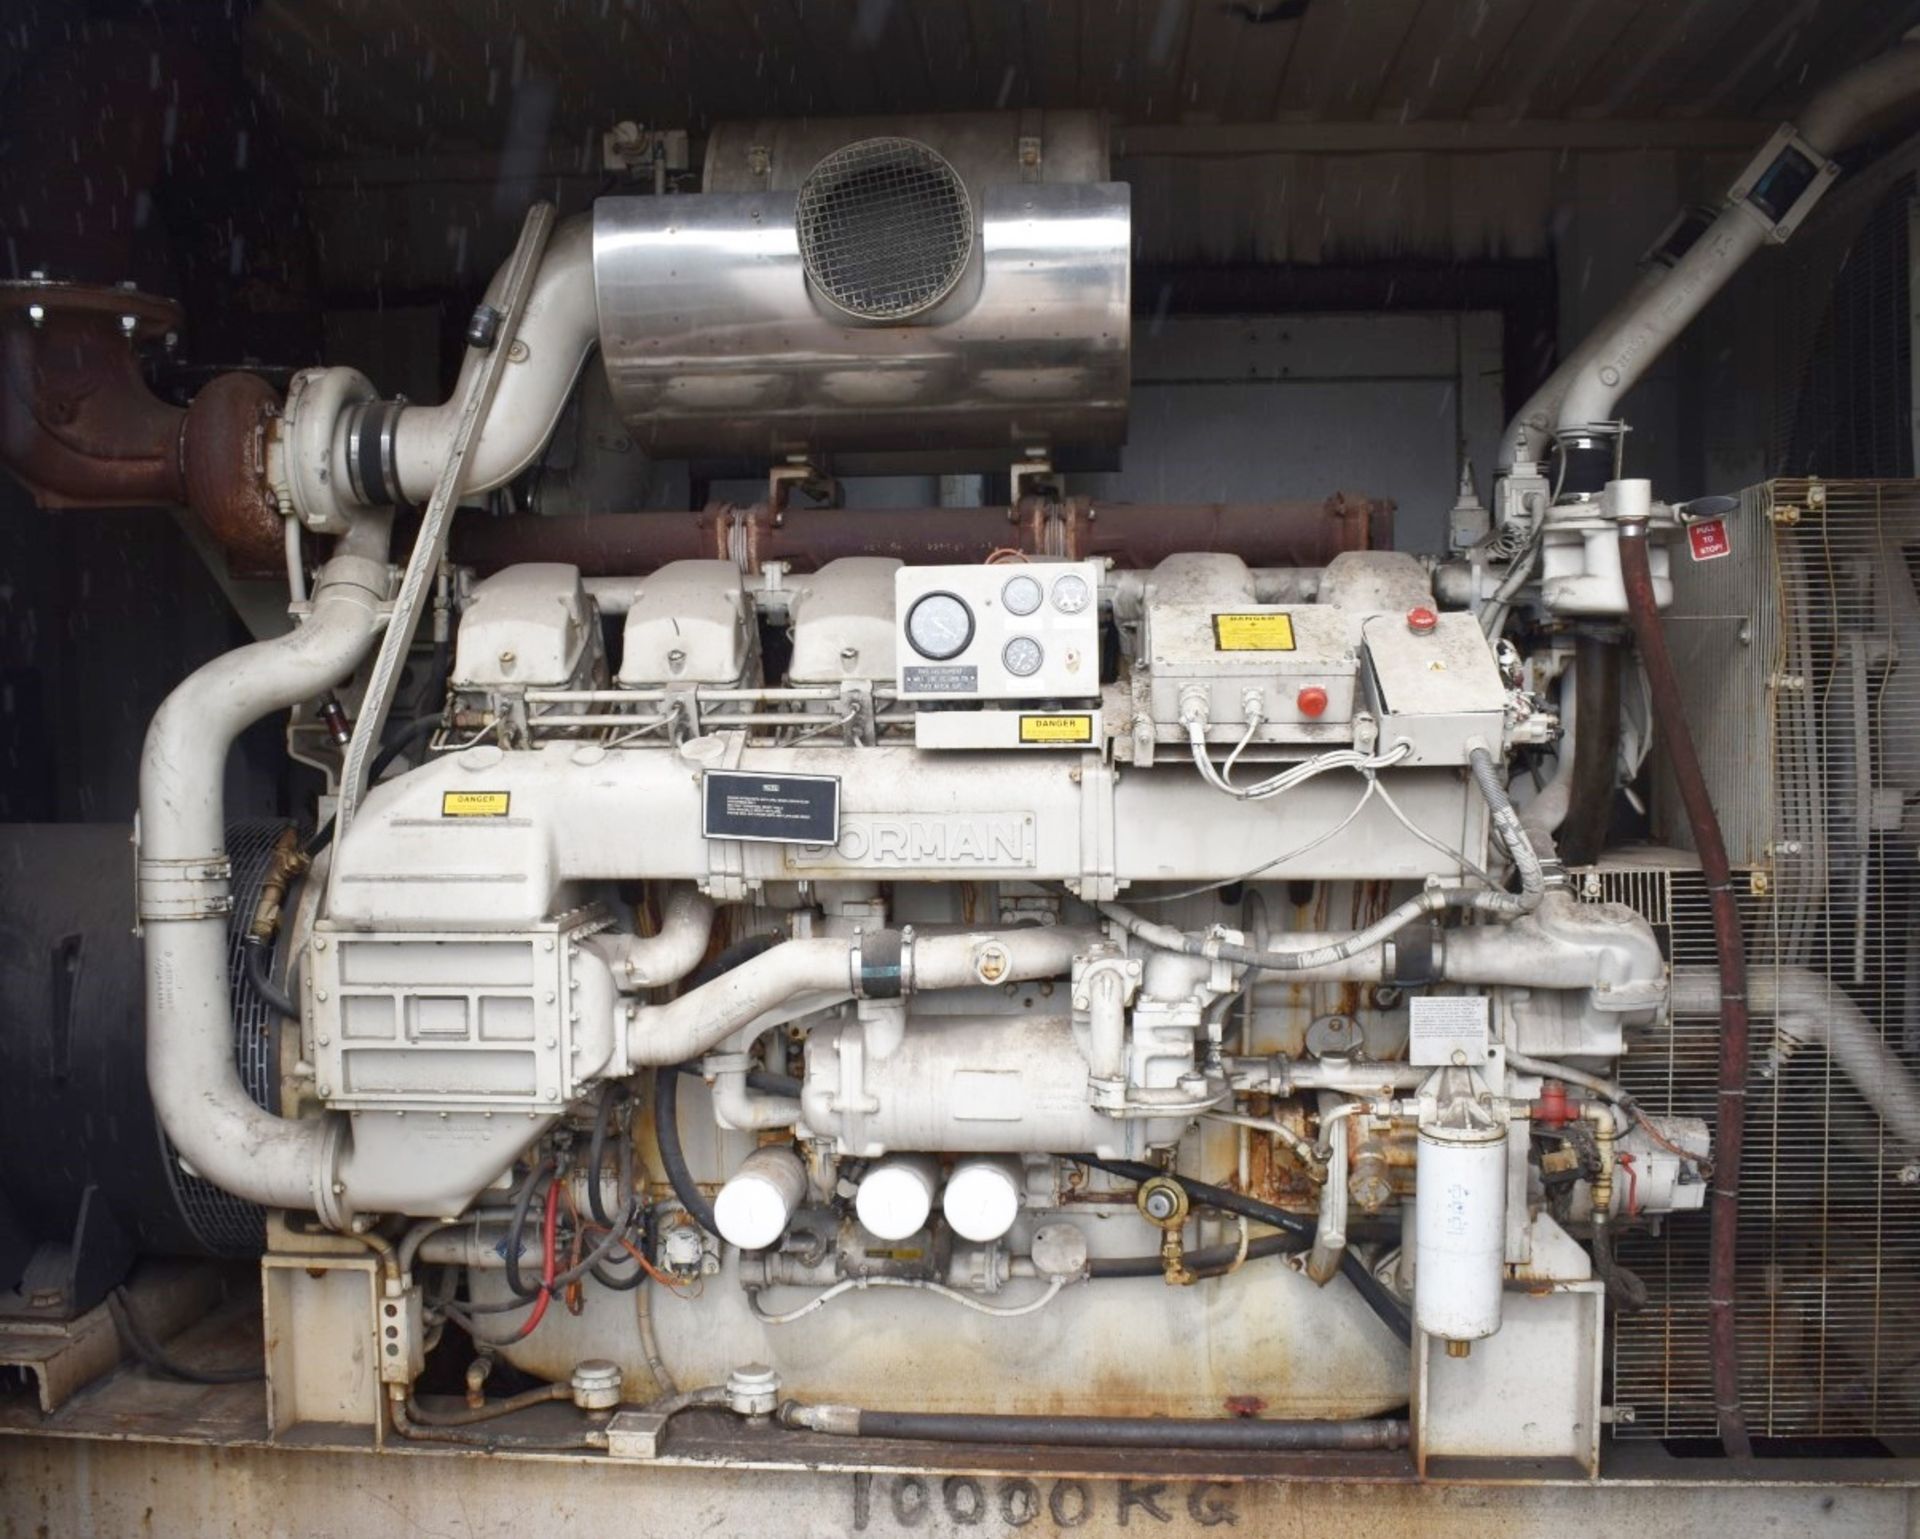 1 x Puma 1000kw Generator With Doorman Engine - Housed in 20ft Shipping Container - CL547 - No VAT